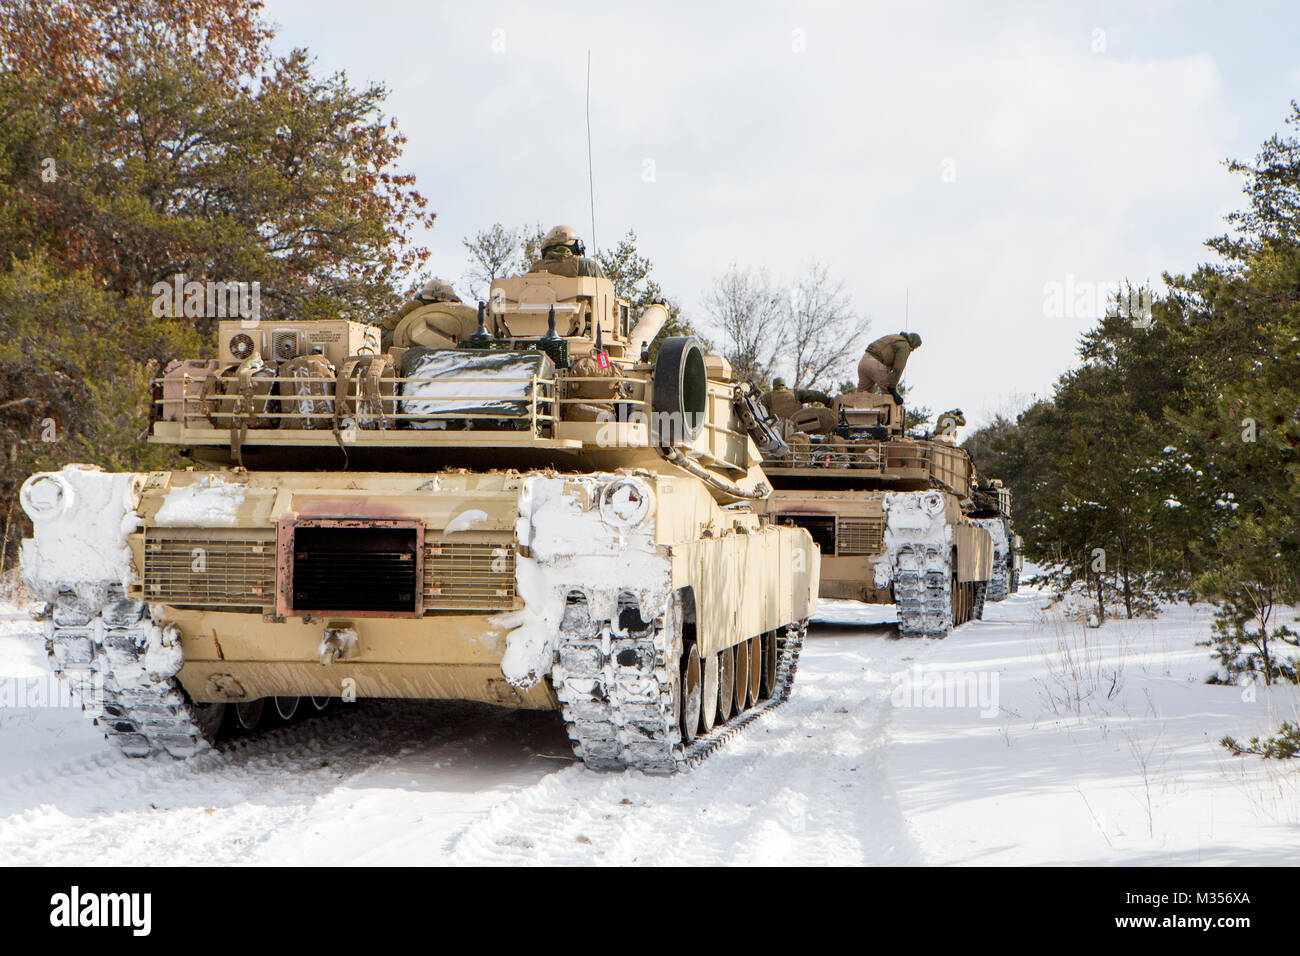 Marines with Company F, 4th Tank Battalion, 4th Marine Division, pause before convoying to a training area during exercise Winter Break 2018 near Camp Grayling, Michigan, Feb. 8, 2018. During training day two of Winter Break 18, Fox Co. Marines rehearsed formations, conducted advanced land navigation and terrain identification and performed preventative maintenance checks and services on their armored vehicles and equipment while increasing their operational capacity in single degree temperatures and snow covered terrain. Stock Photo